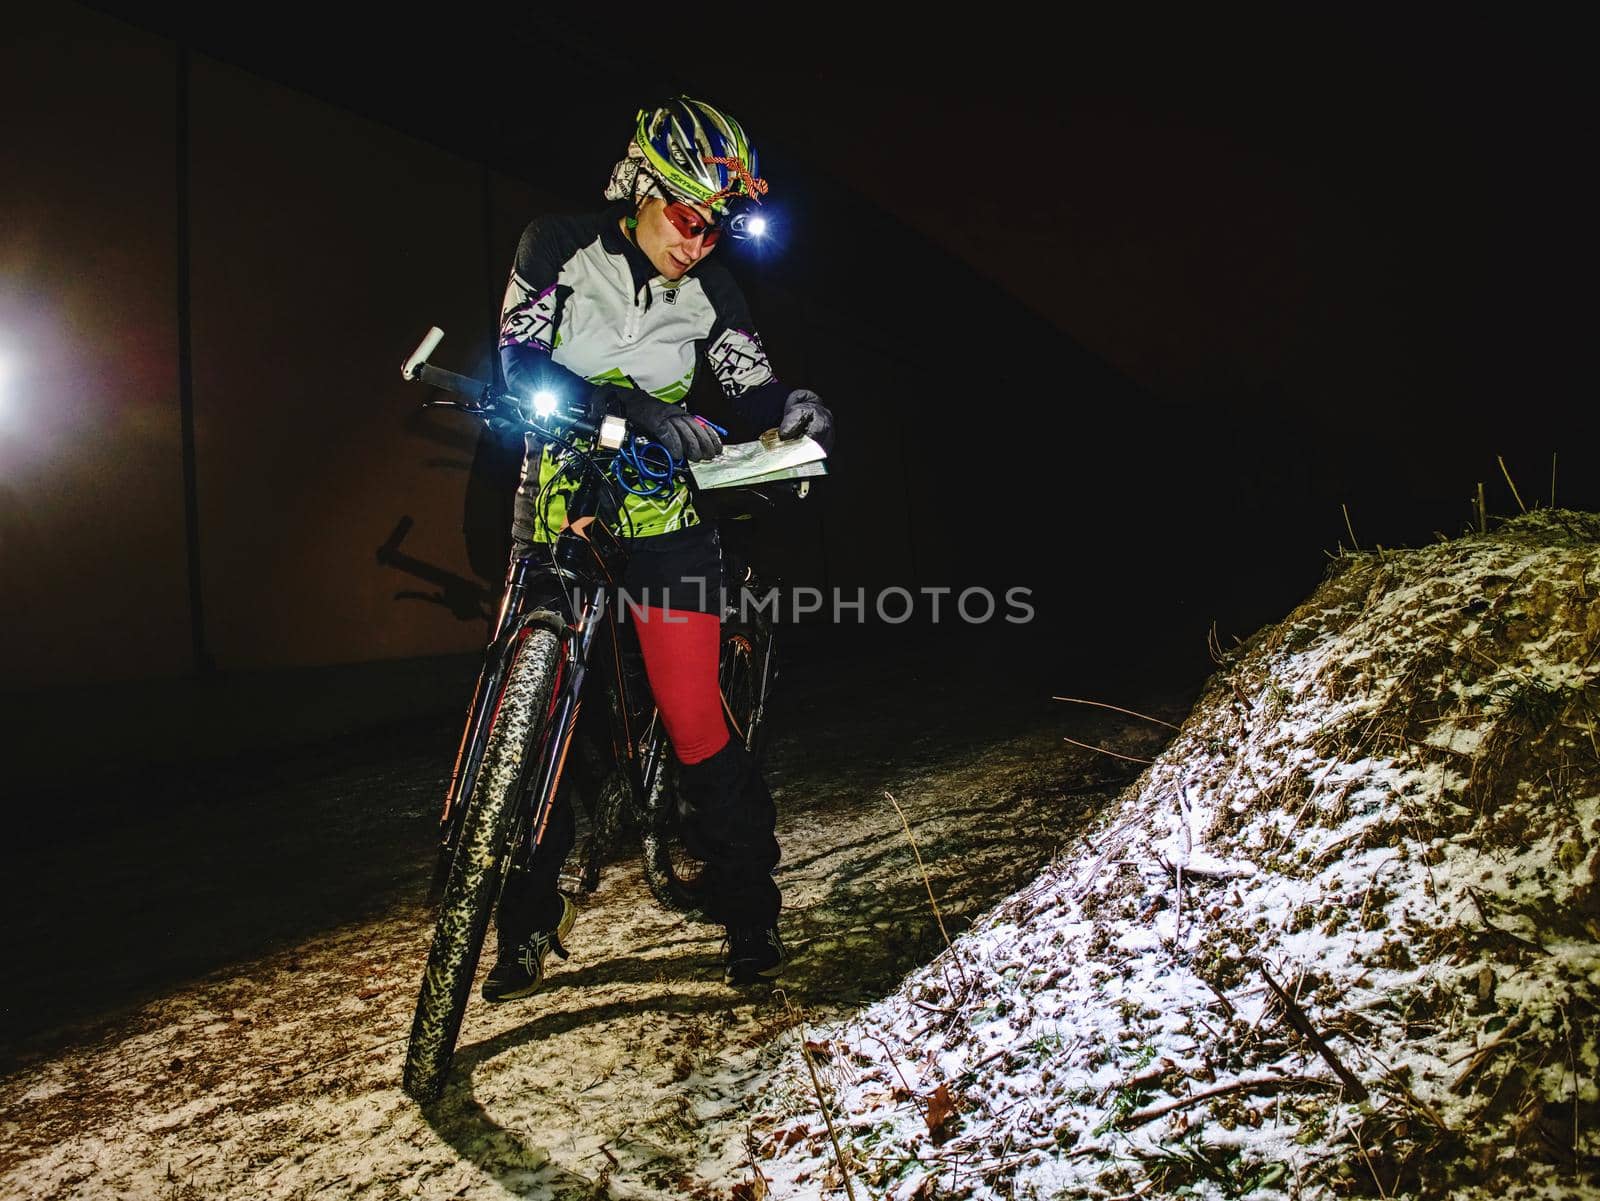 Outdoor orienteering extreme bike race in night. January 25th 2019, Novy Bor, Czech Republic. Woman check the map. Kind of sports that require navigational skills using a map and compass to achieve target.